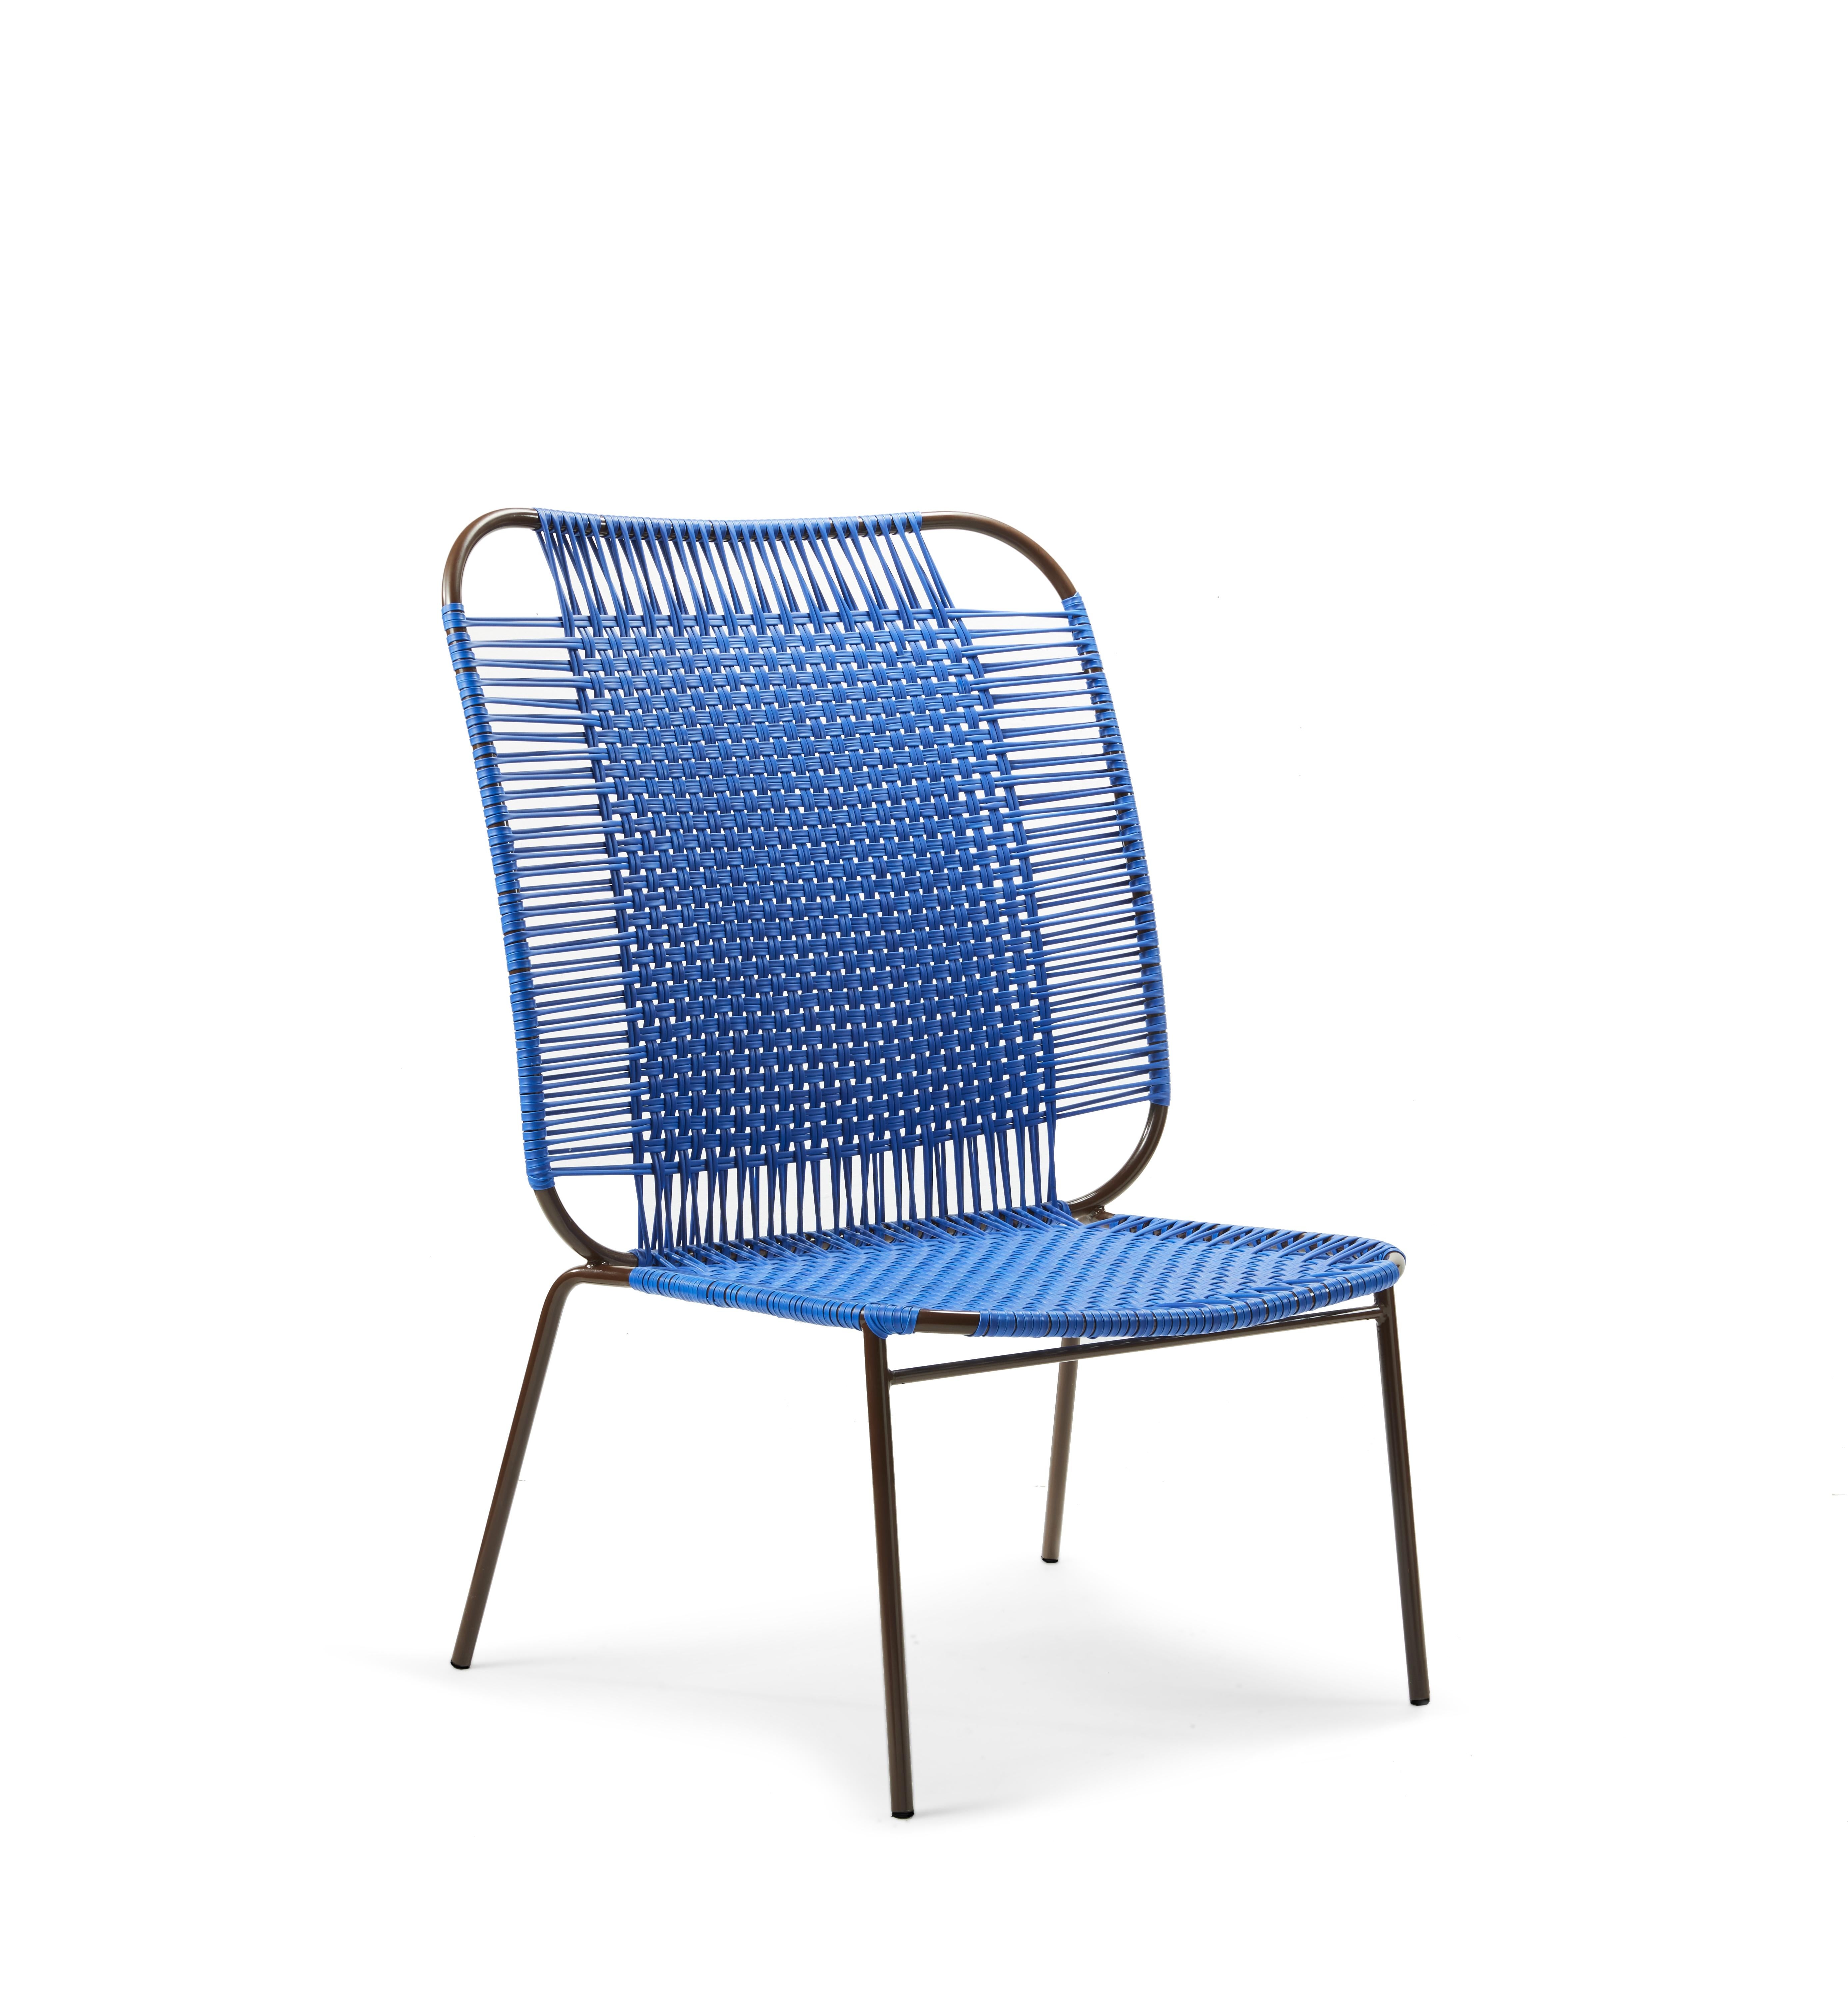 Blue Cielo lounge high chair by Sebastian Herkner
Materials: Galvanized and powder-coated tubular steel. PVC strings are made from recycled plastic.
Technique: Made from recycled plastic and weaved by local craftspeople in Cartagena, Colombia.